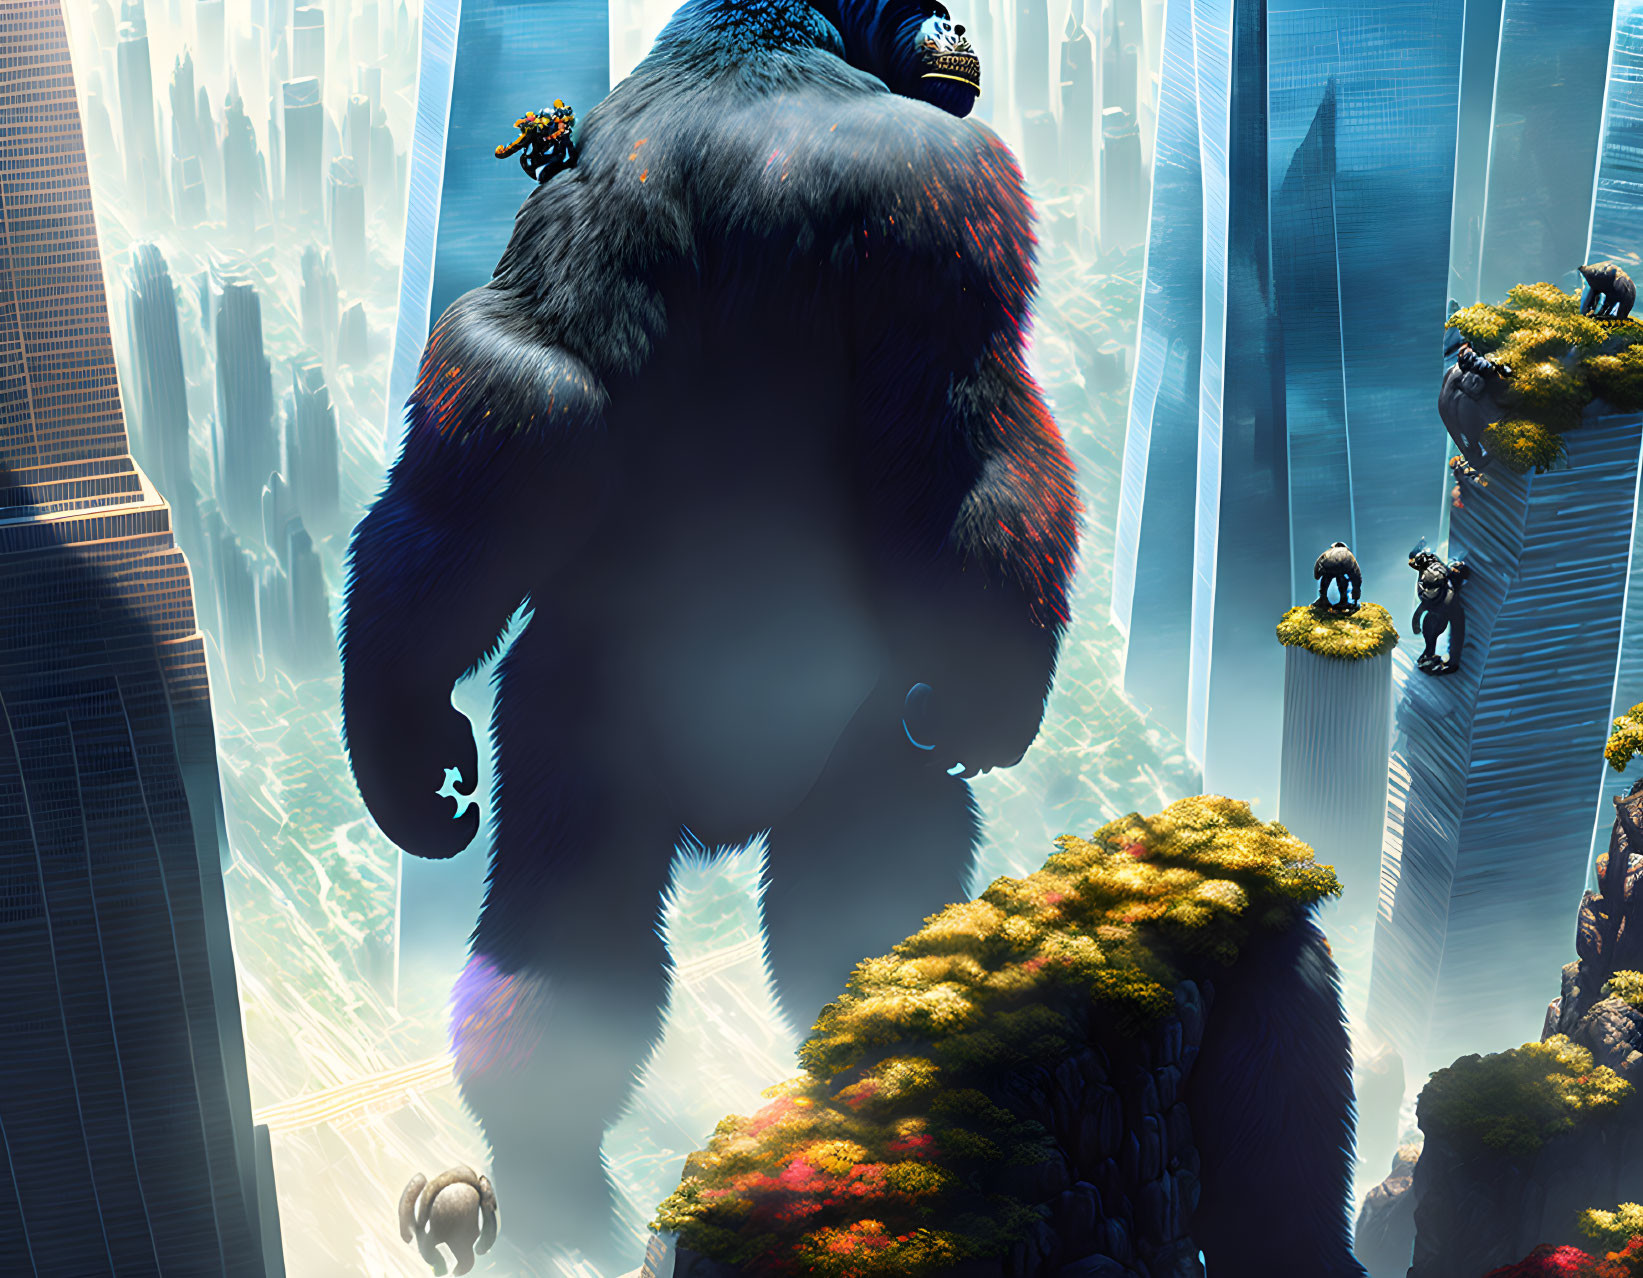 Enormous gorilla dominates futuristic city with jetpack-wearing figures and skyscrapers.